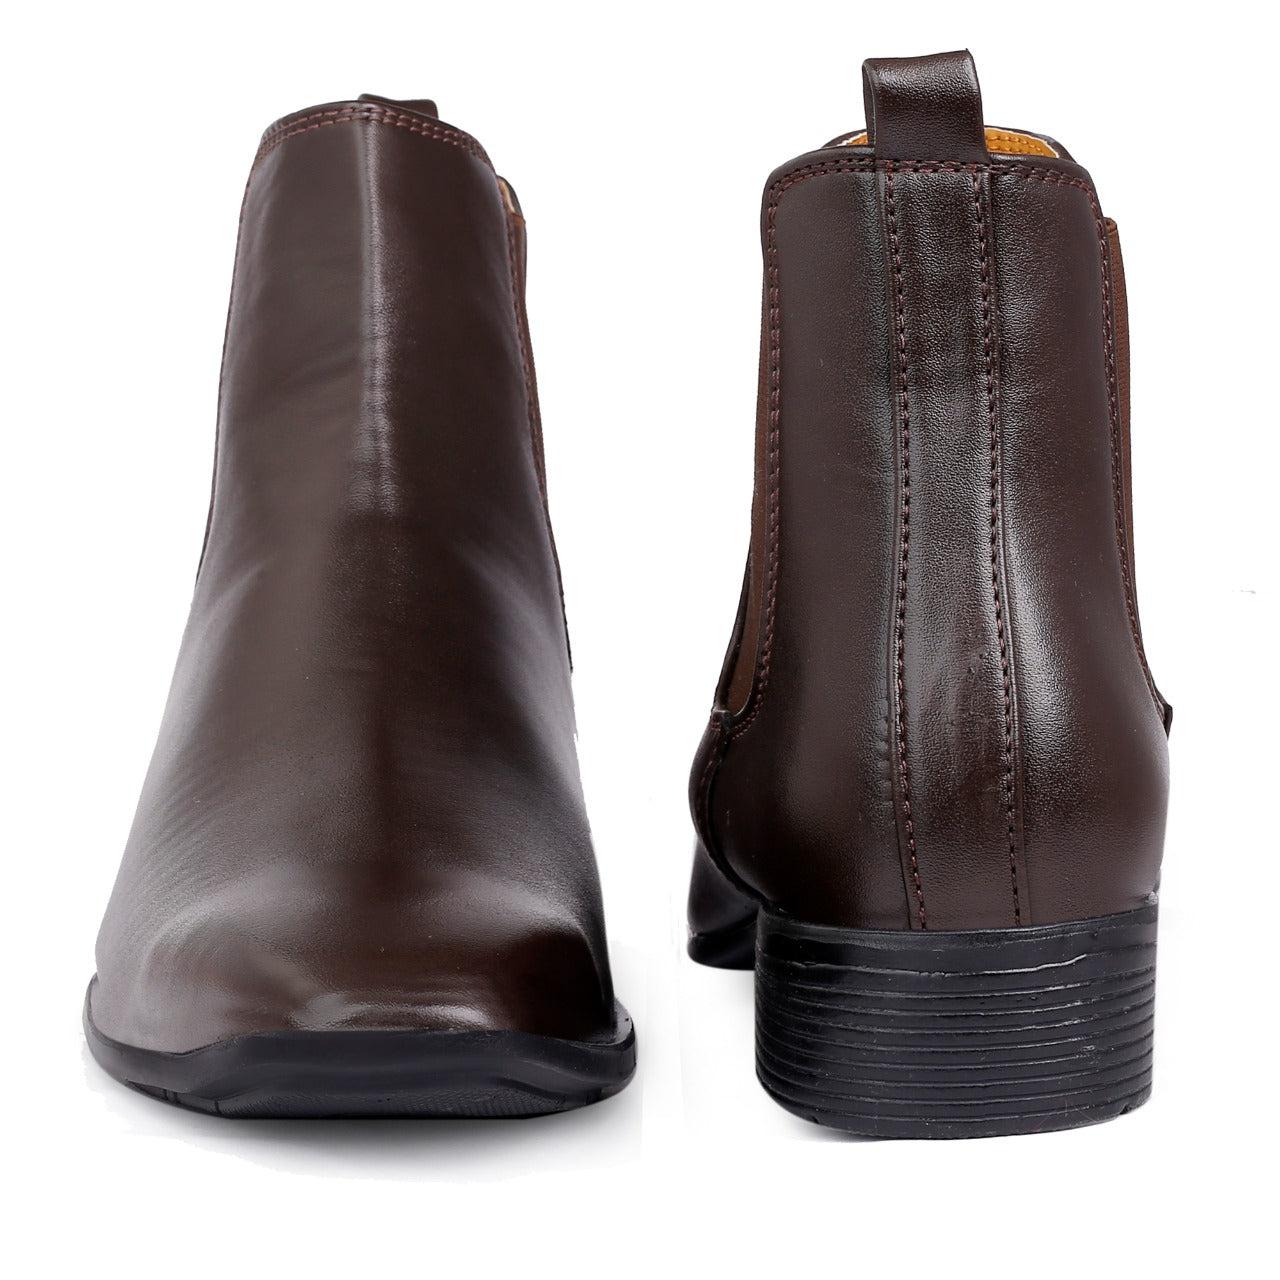 New Men's Stylish Formal and Casual Wear British Chelsea Ankle Boots - JACKMARC.COM